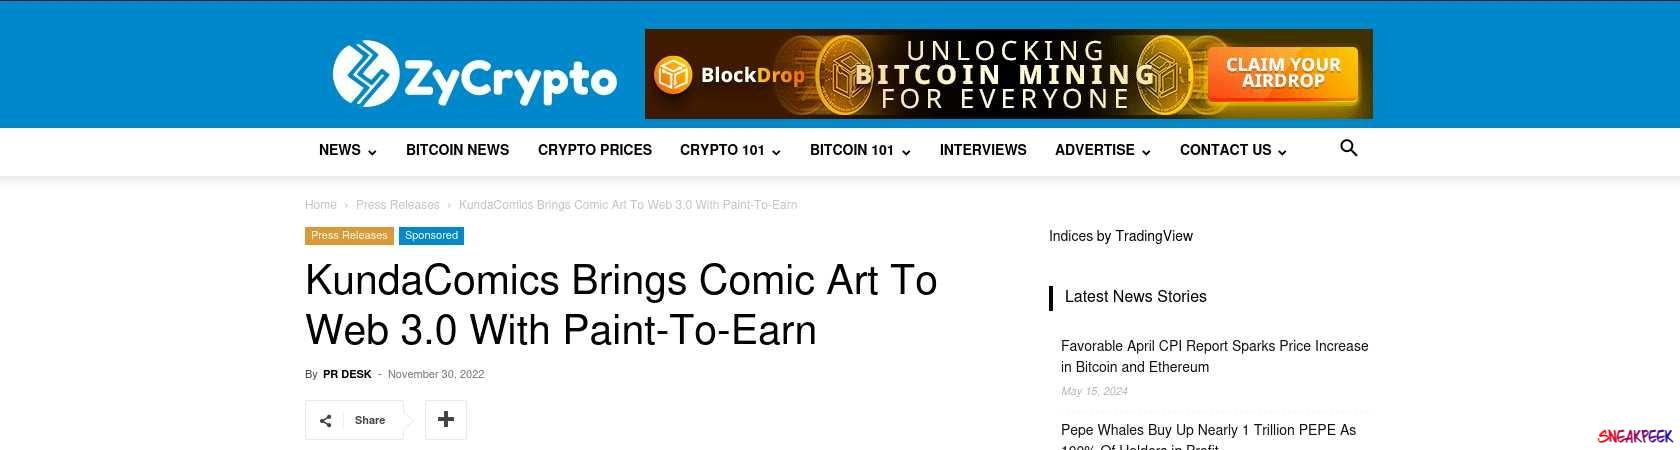 Read the full Article:  ⭲ KundaComics Brings Comic Art To Web 3.0 With Paint-To-Earn